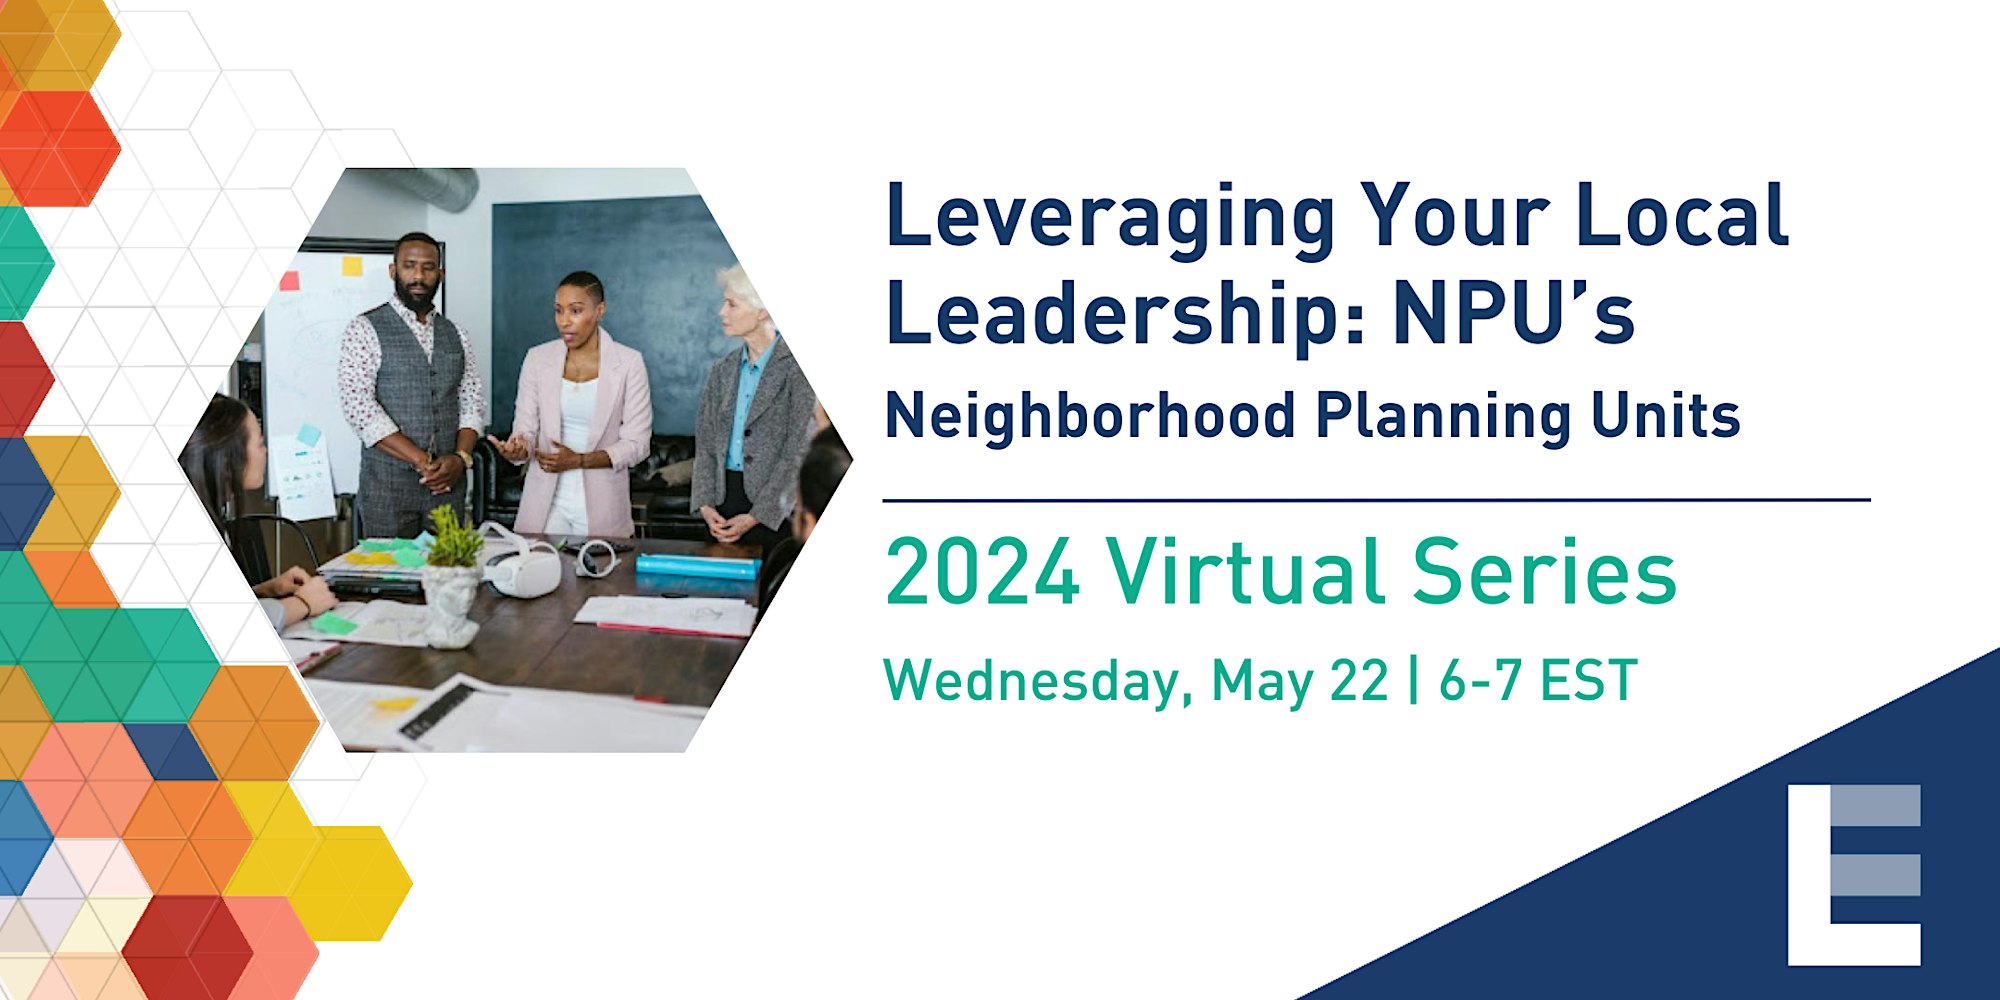 Leveraging Your Local Leadership: NPU's Wednesday May 22 6-7 EST